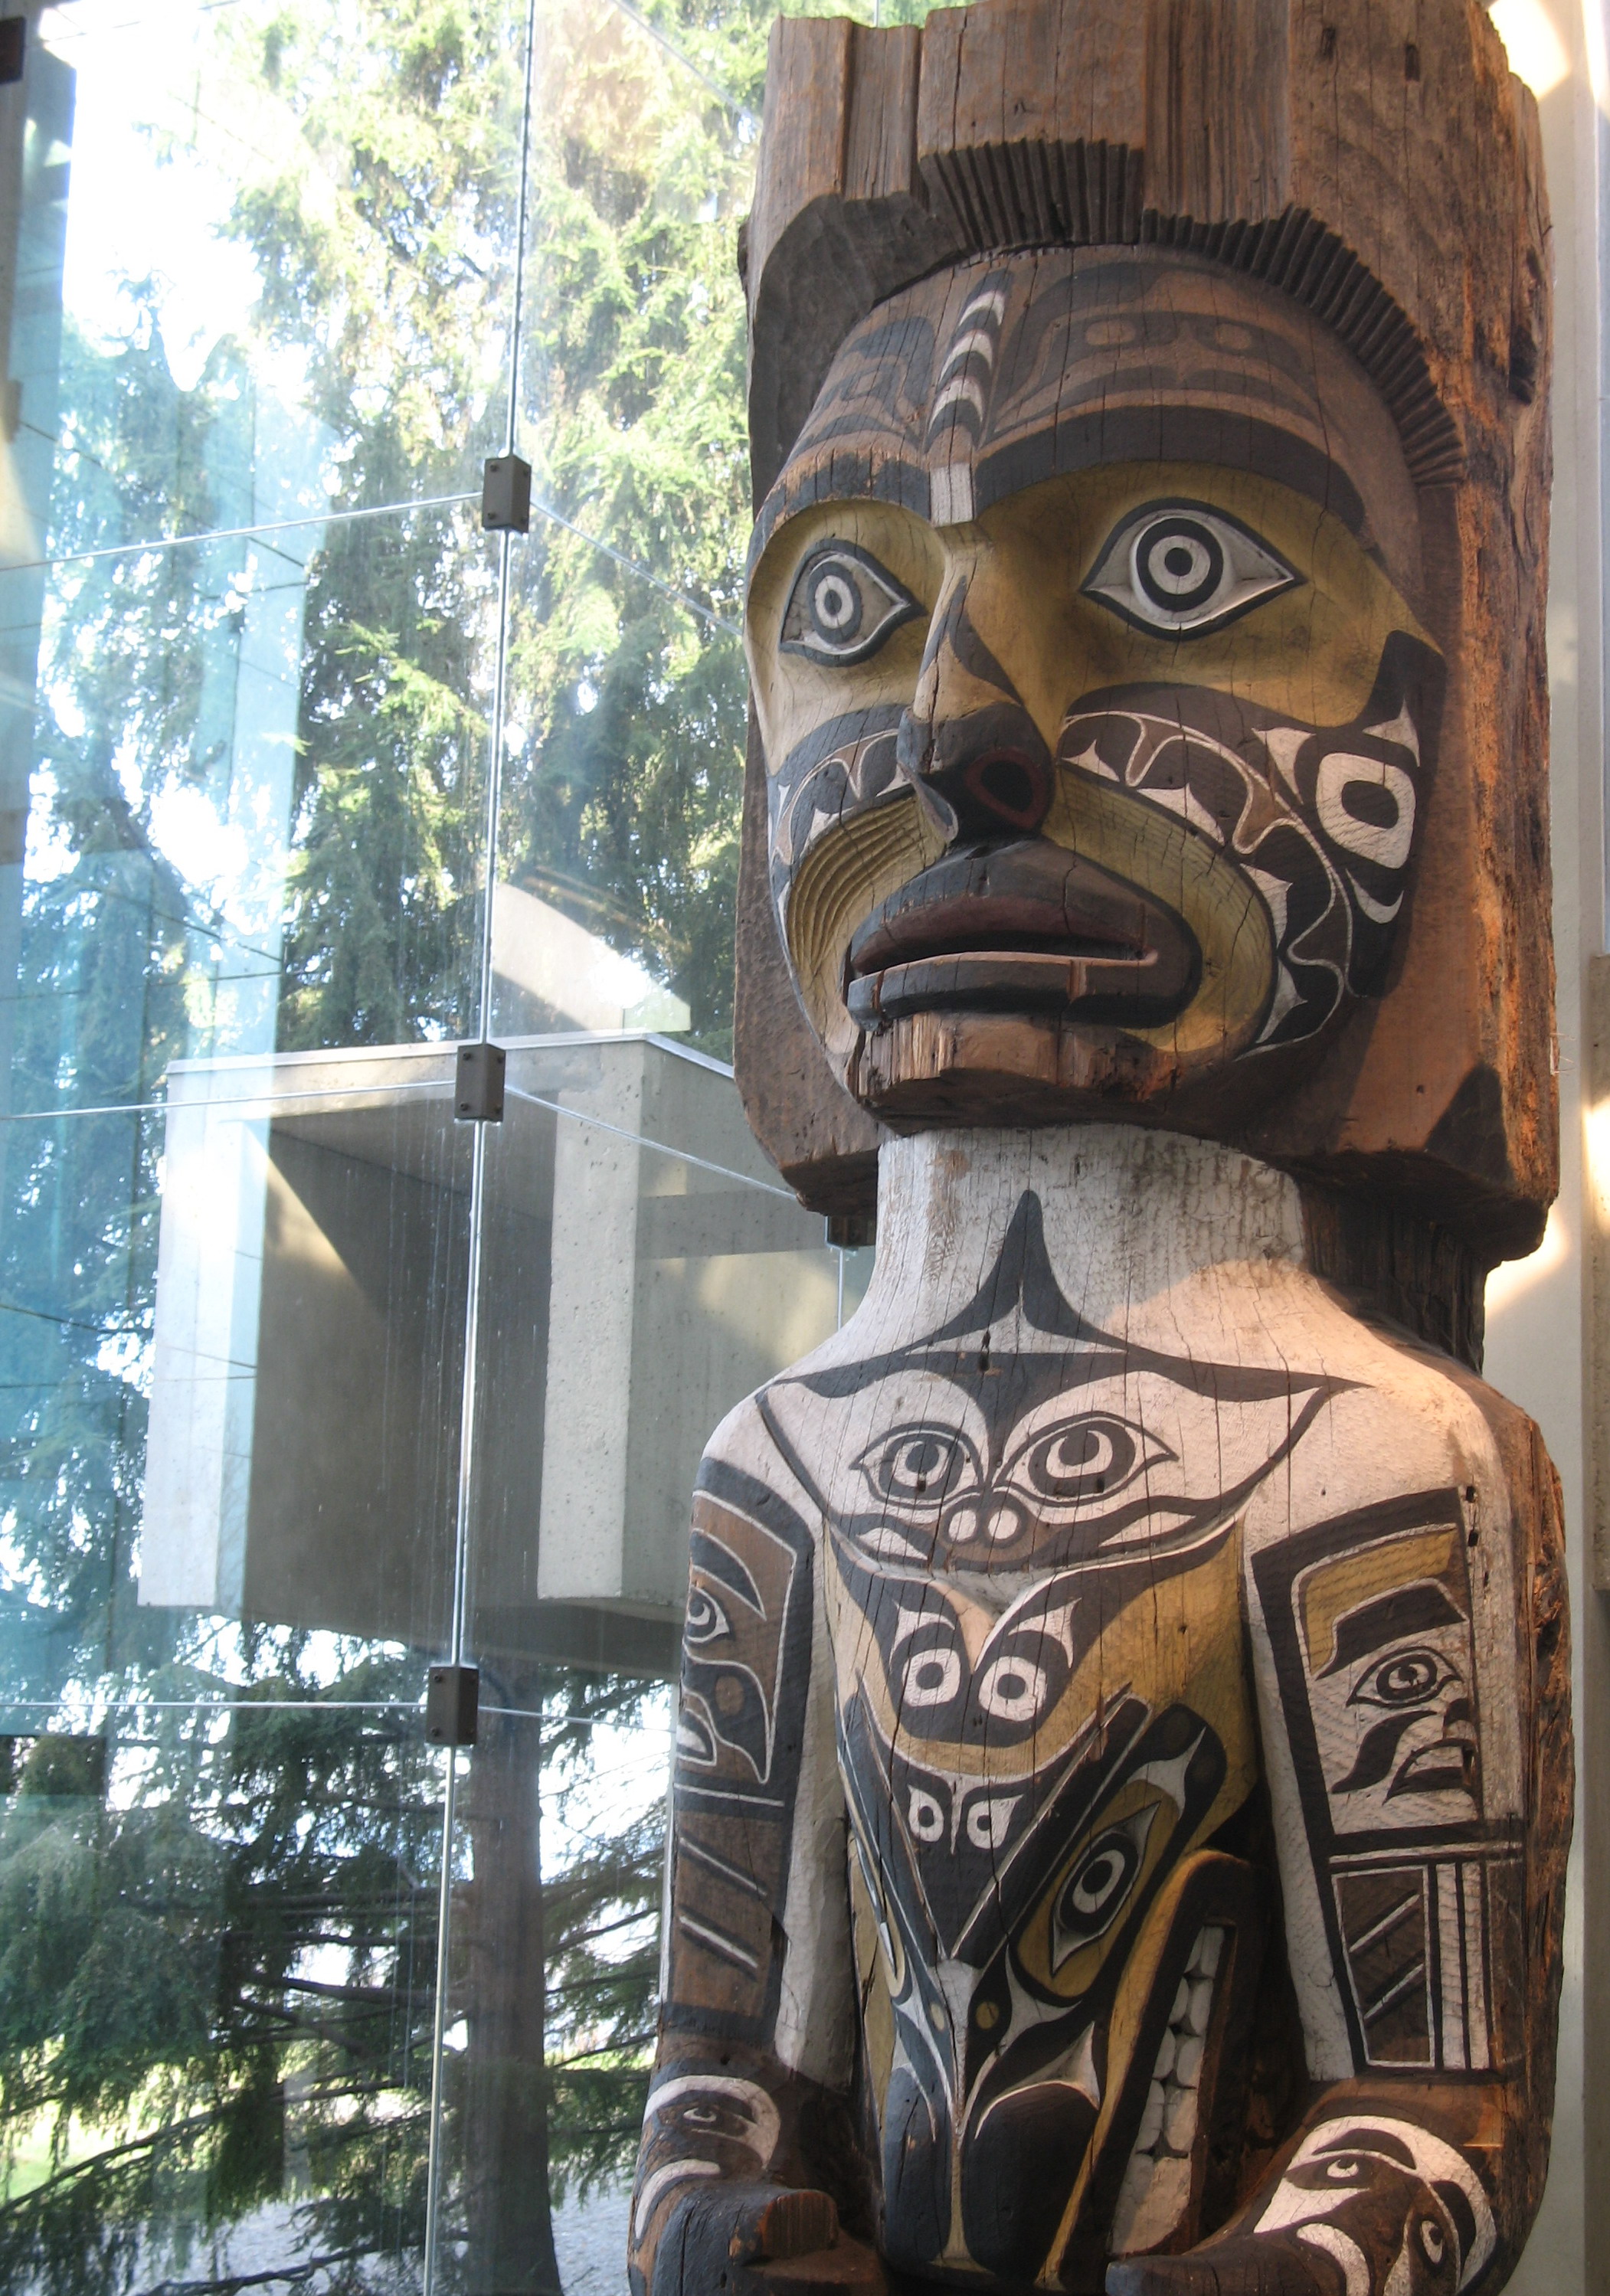 File:UBC MOA First Nations wood statue carving.jpg - Wikimedia Commons